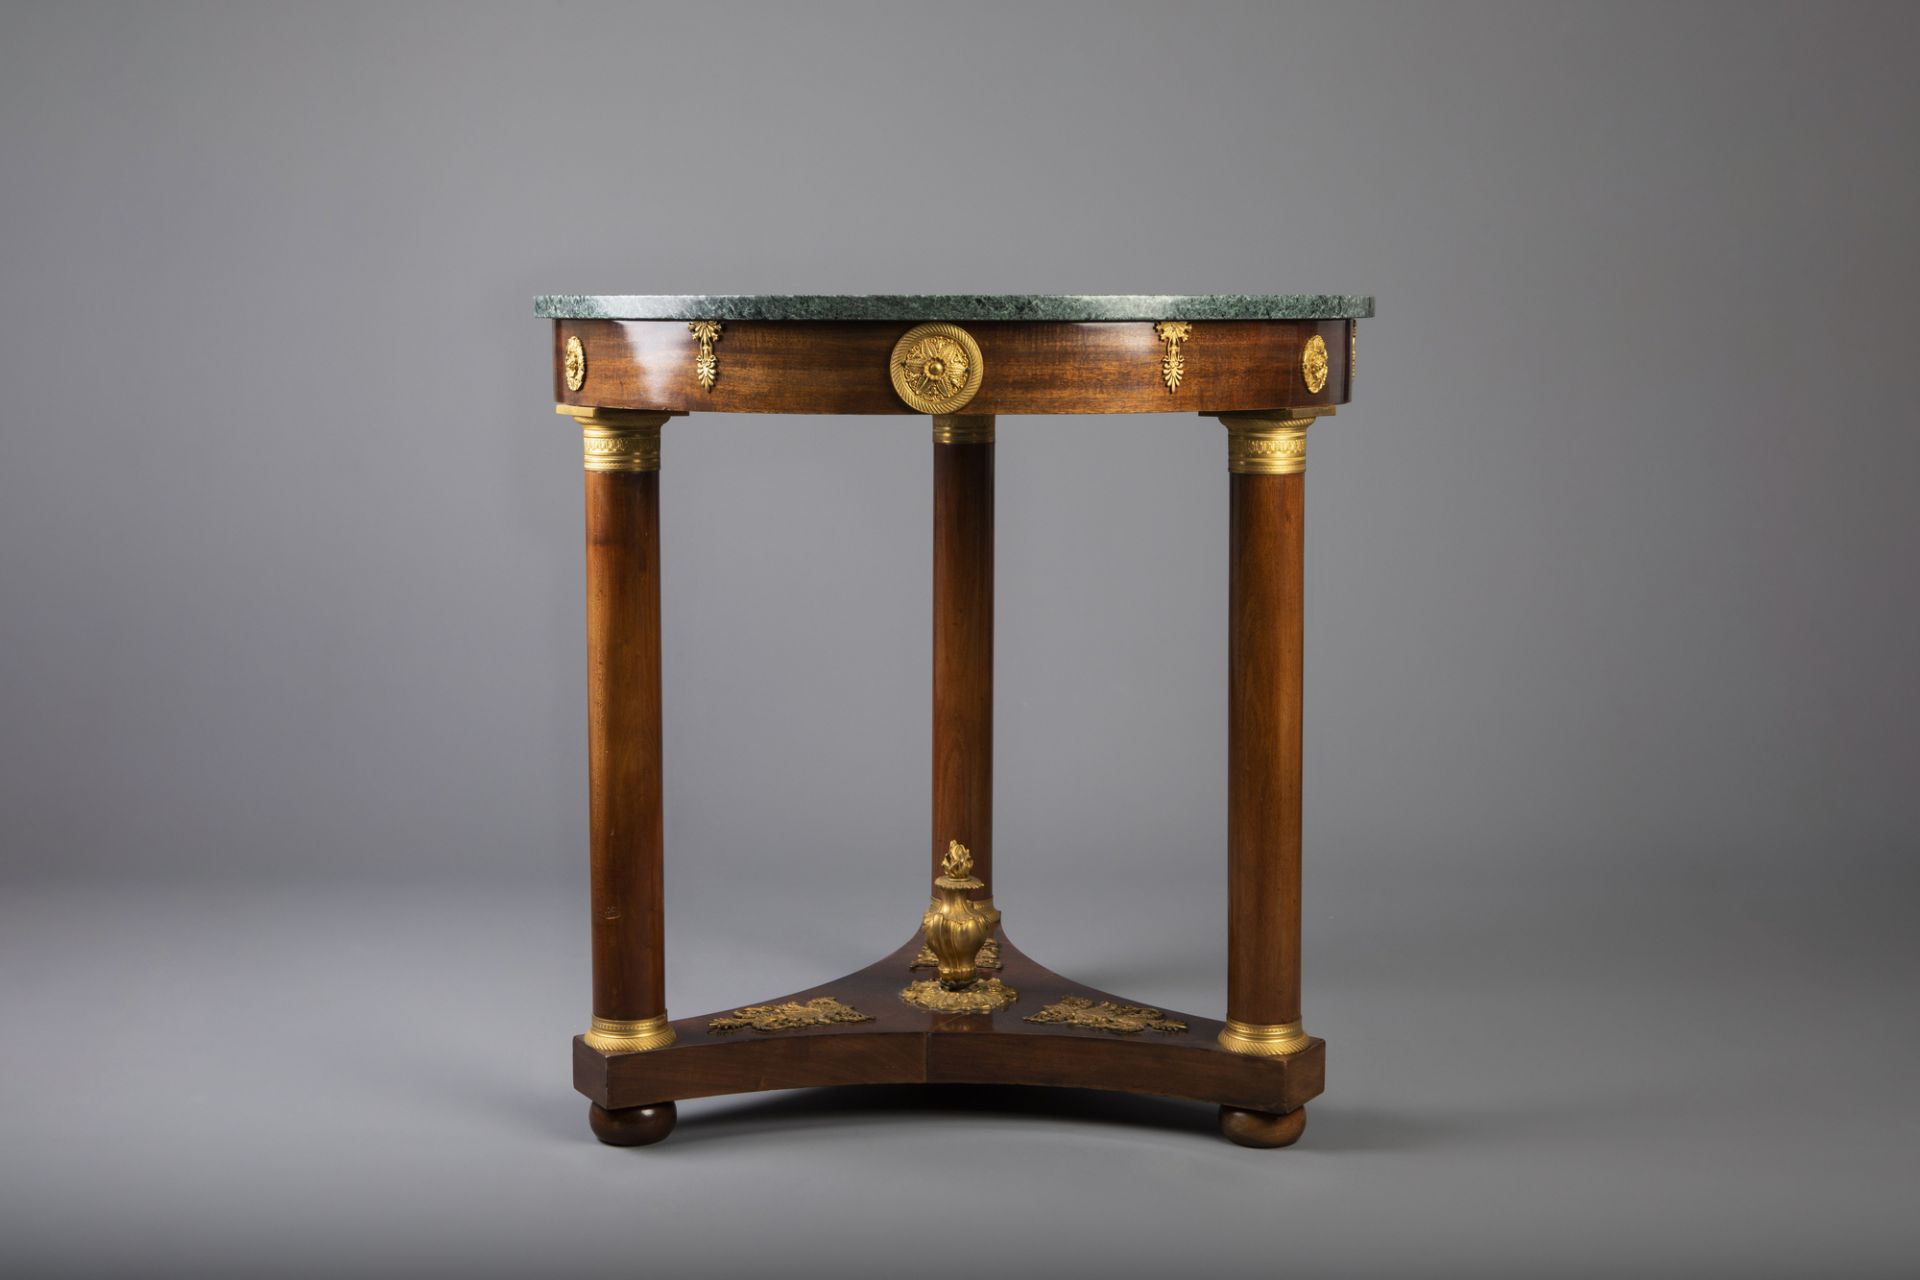 An imposing Empire style gilt bronze mounted mahogany and upholstered seven-piece salon set, France, - Image 26 of 34